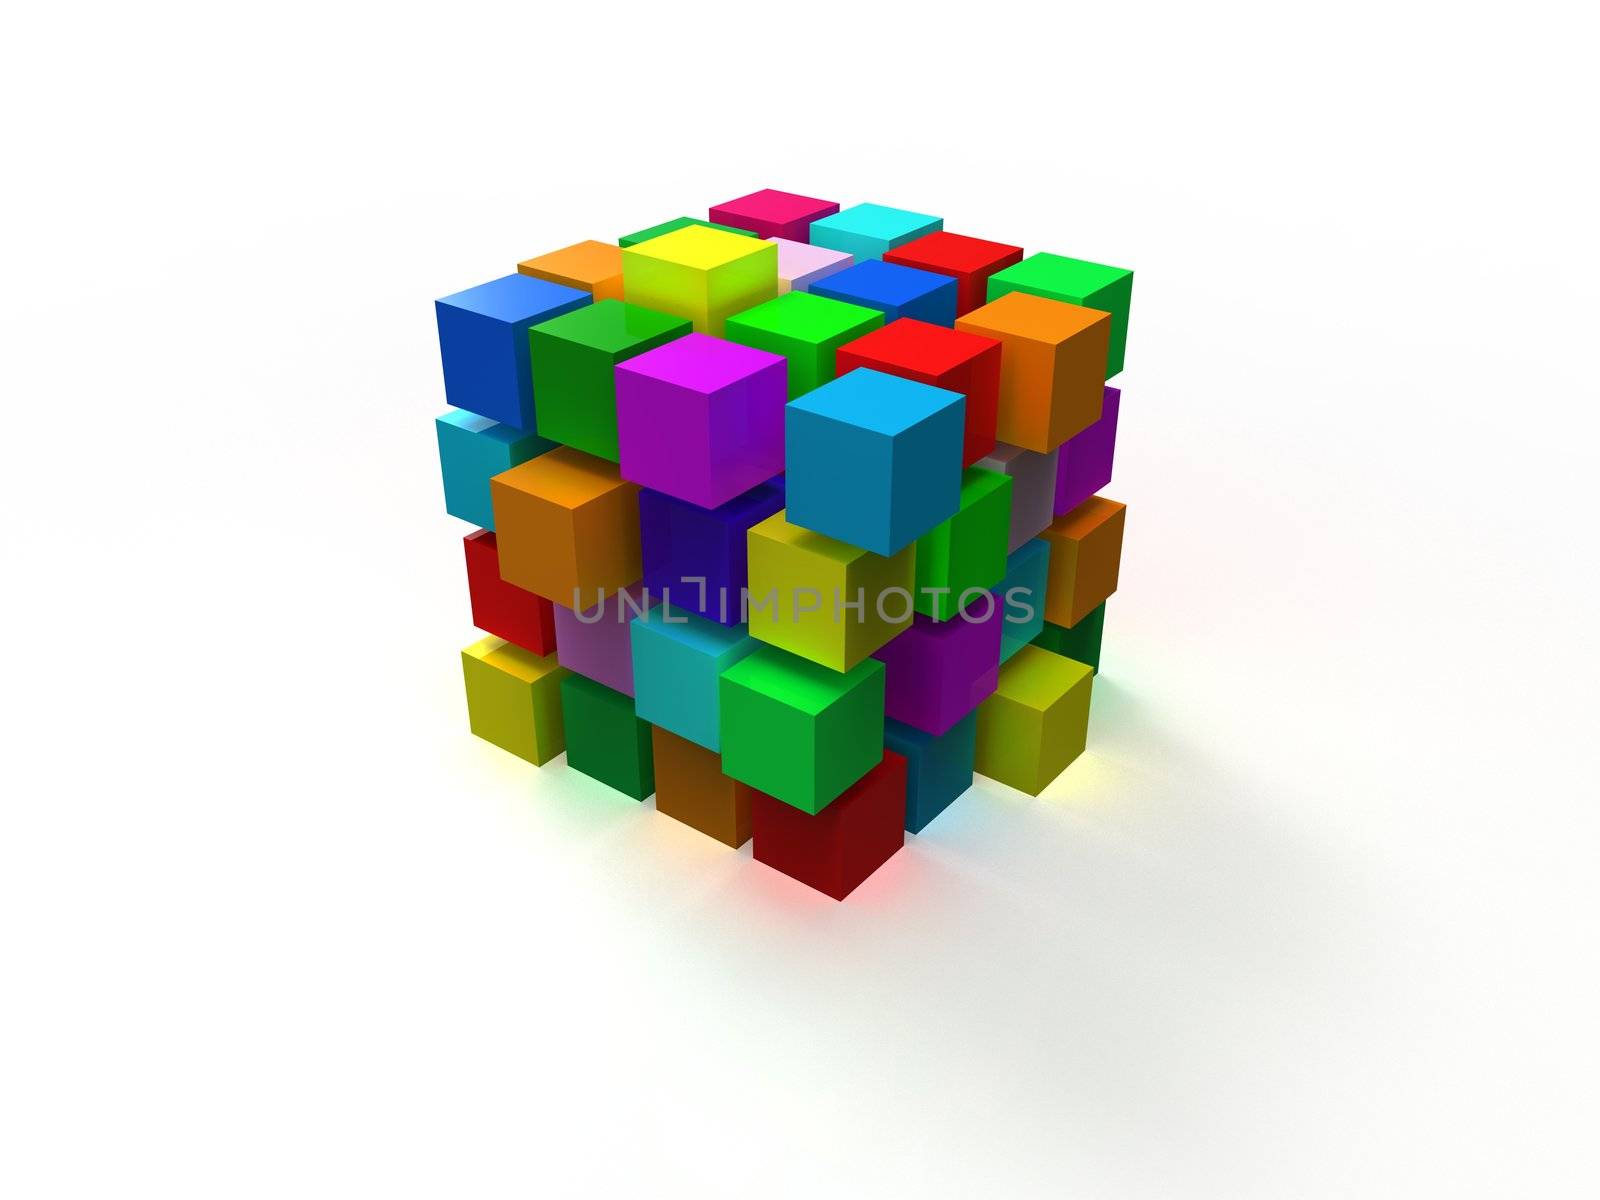 4x4 colorful disordered cube assembling from blocks isolated on white background